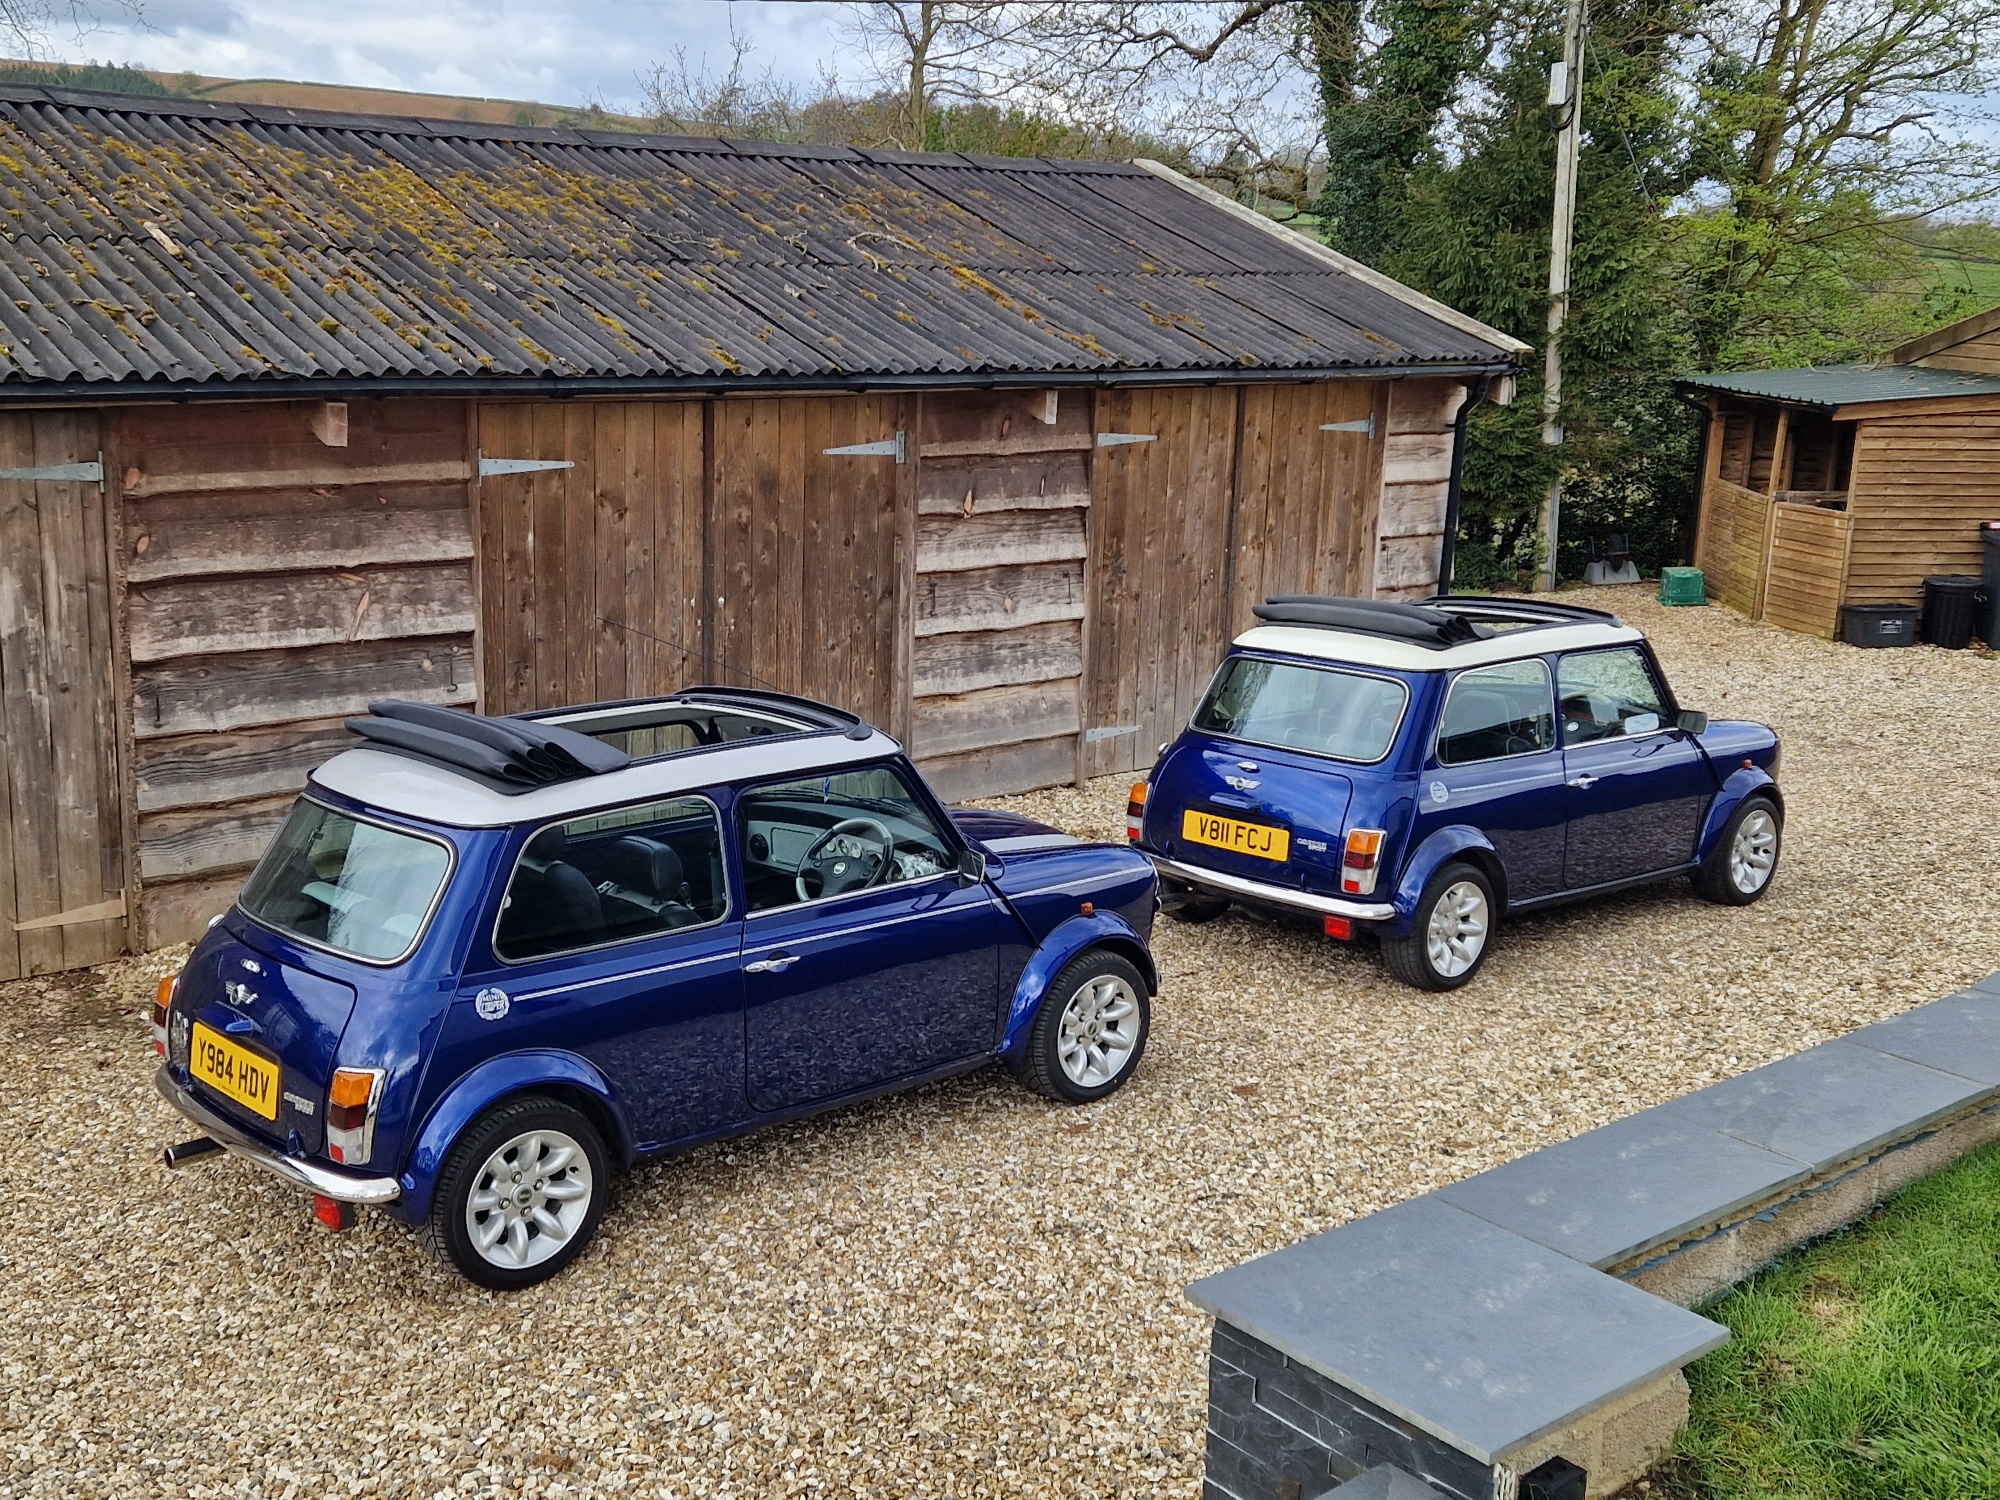 ** More Exciting, Quality Classic Minis In The Pipeline Awaiting Preparation **